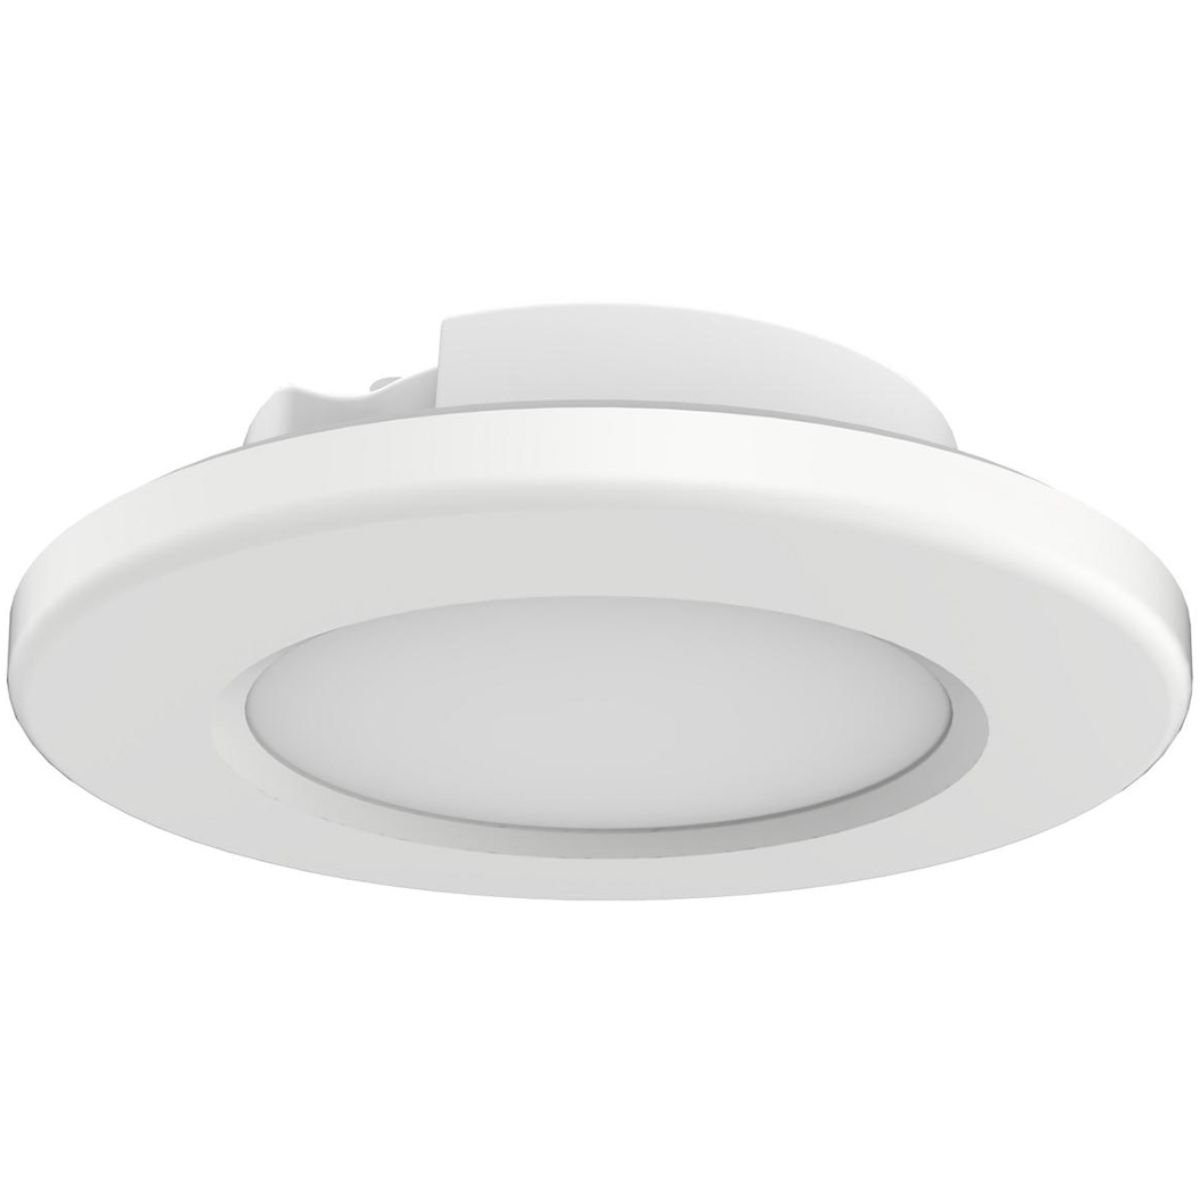 4 In. LED Disk / Surface Mount Light 5000K White Finish Contractor Pack Of 6 - Bees Lighting